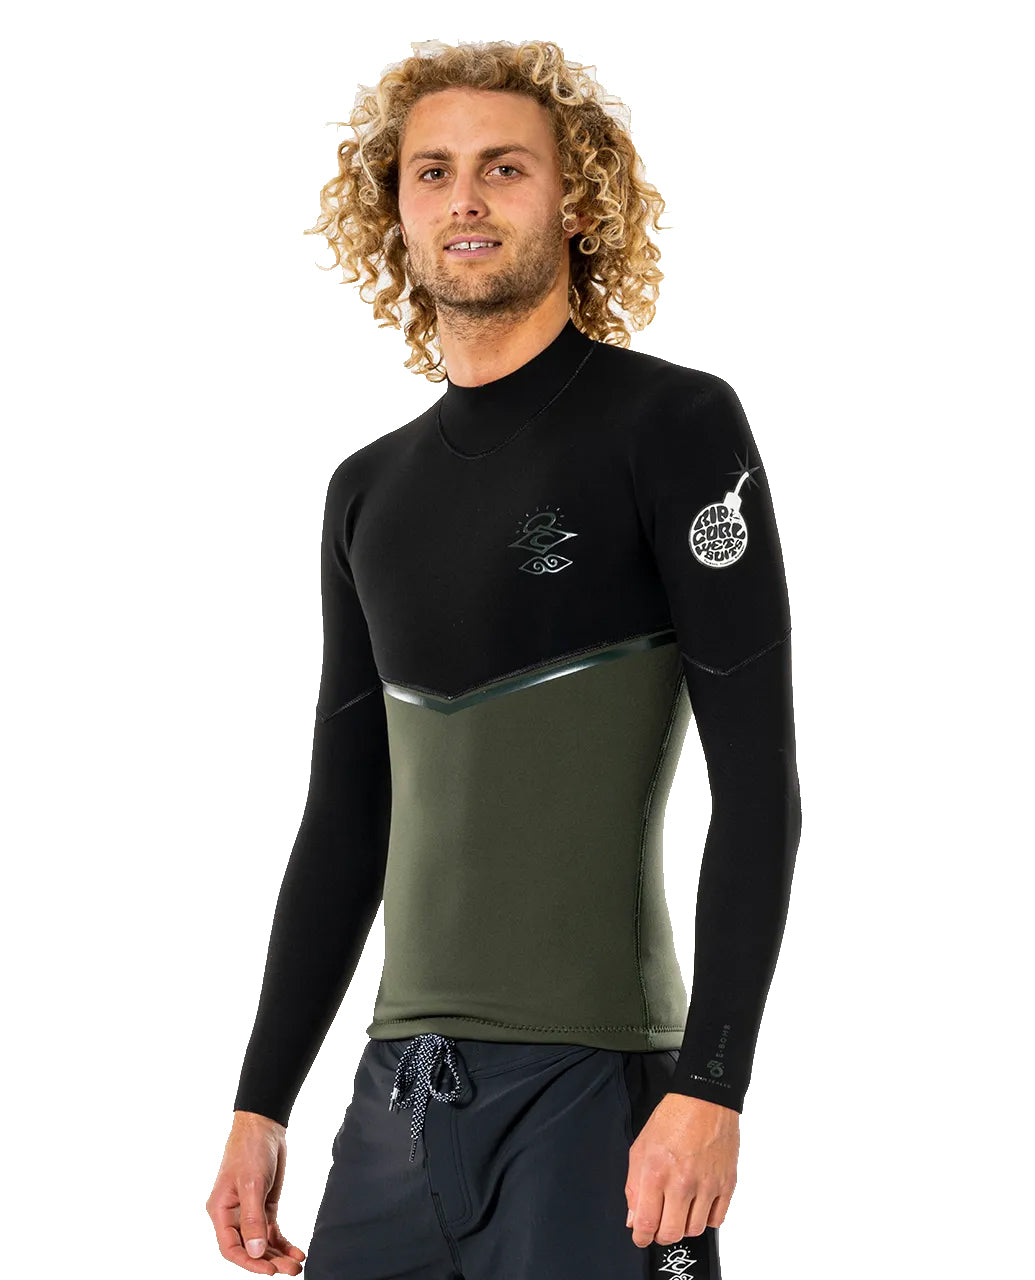 Rip Curl E-Bomb 1.5mm LS GBS Wetsuit Jacket 0058-Olive S